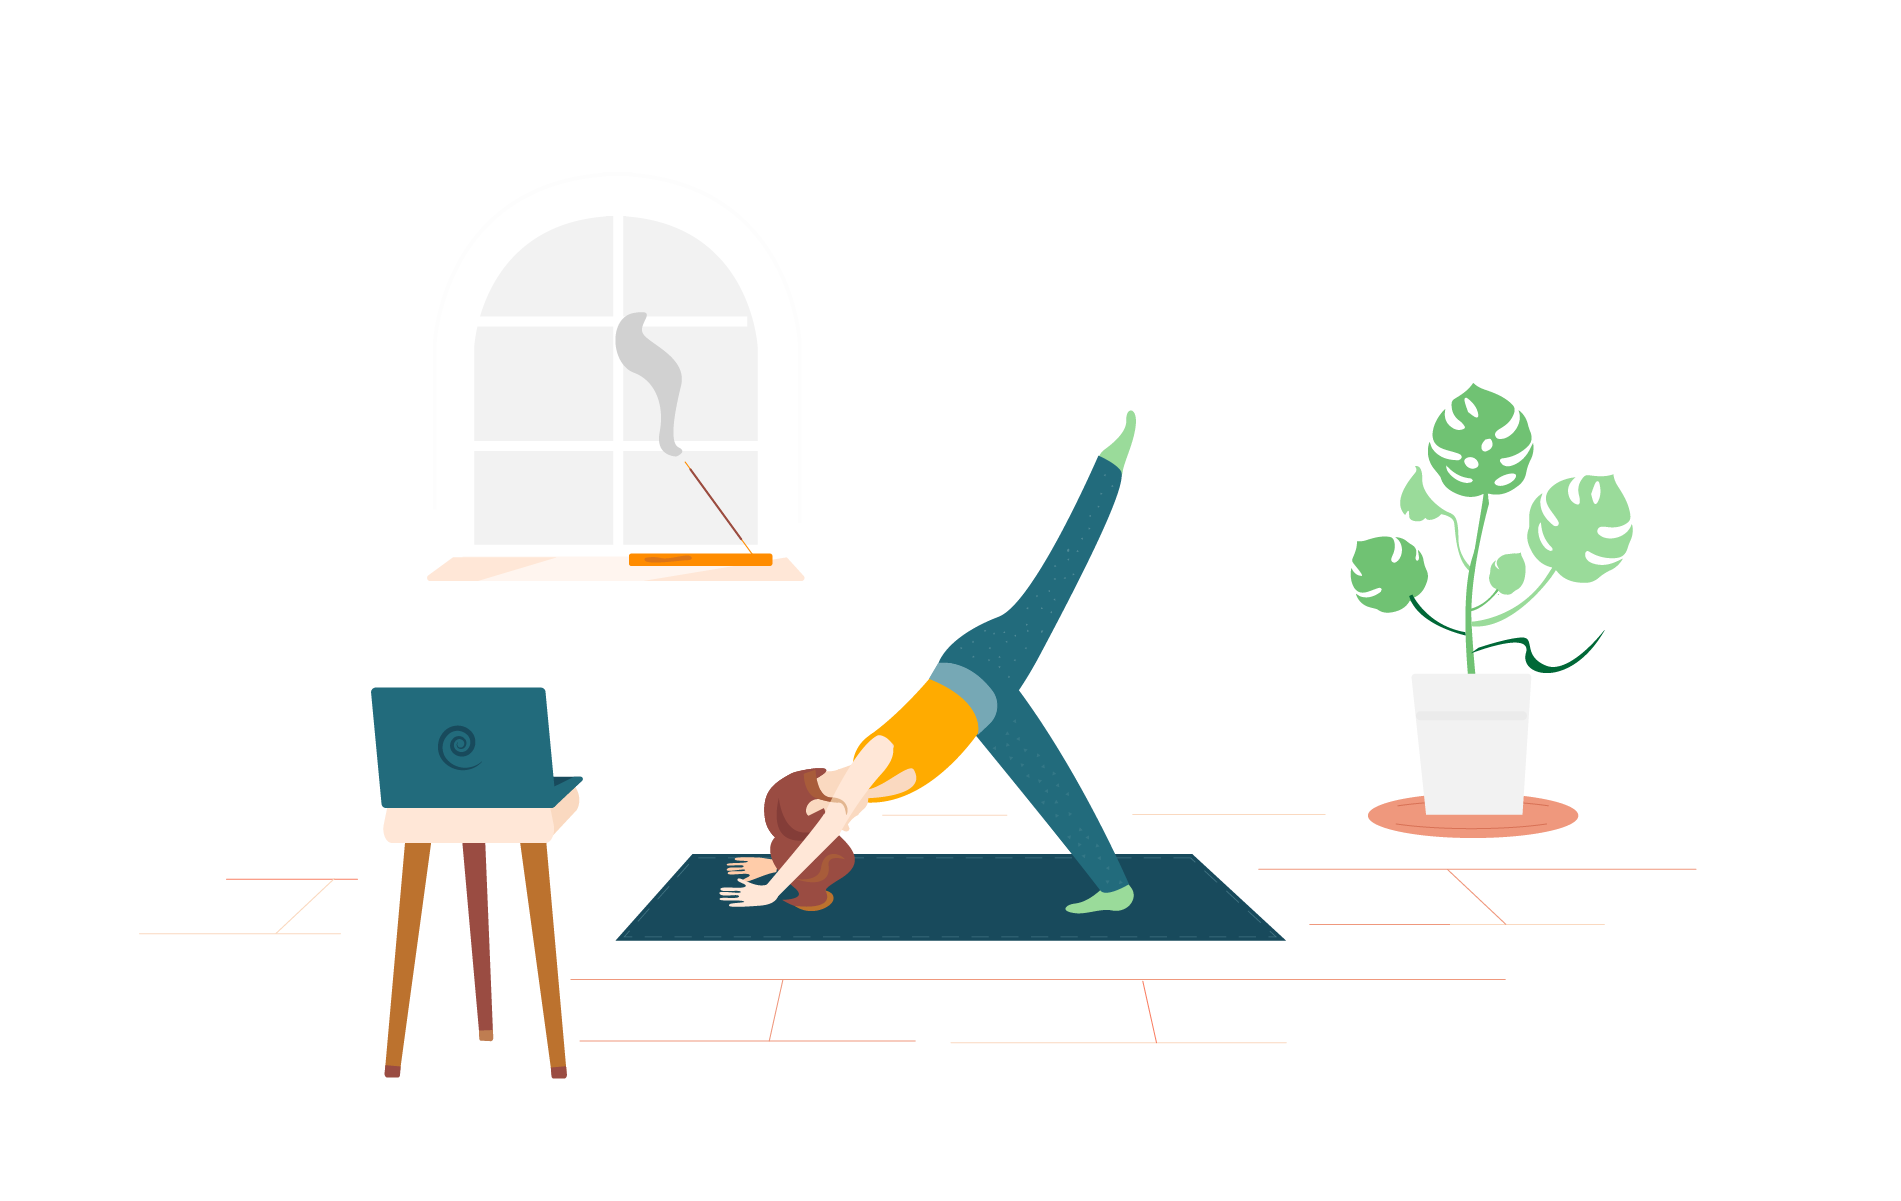 23 exercise ideas and tips for remote workers - Employee recognition and engagement blog